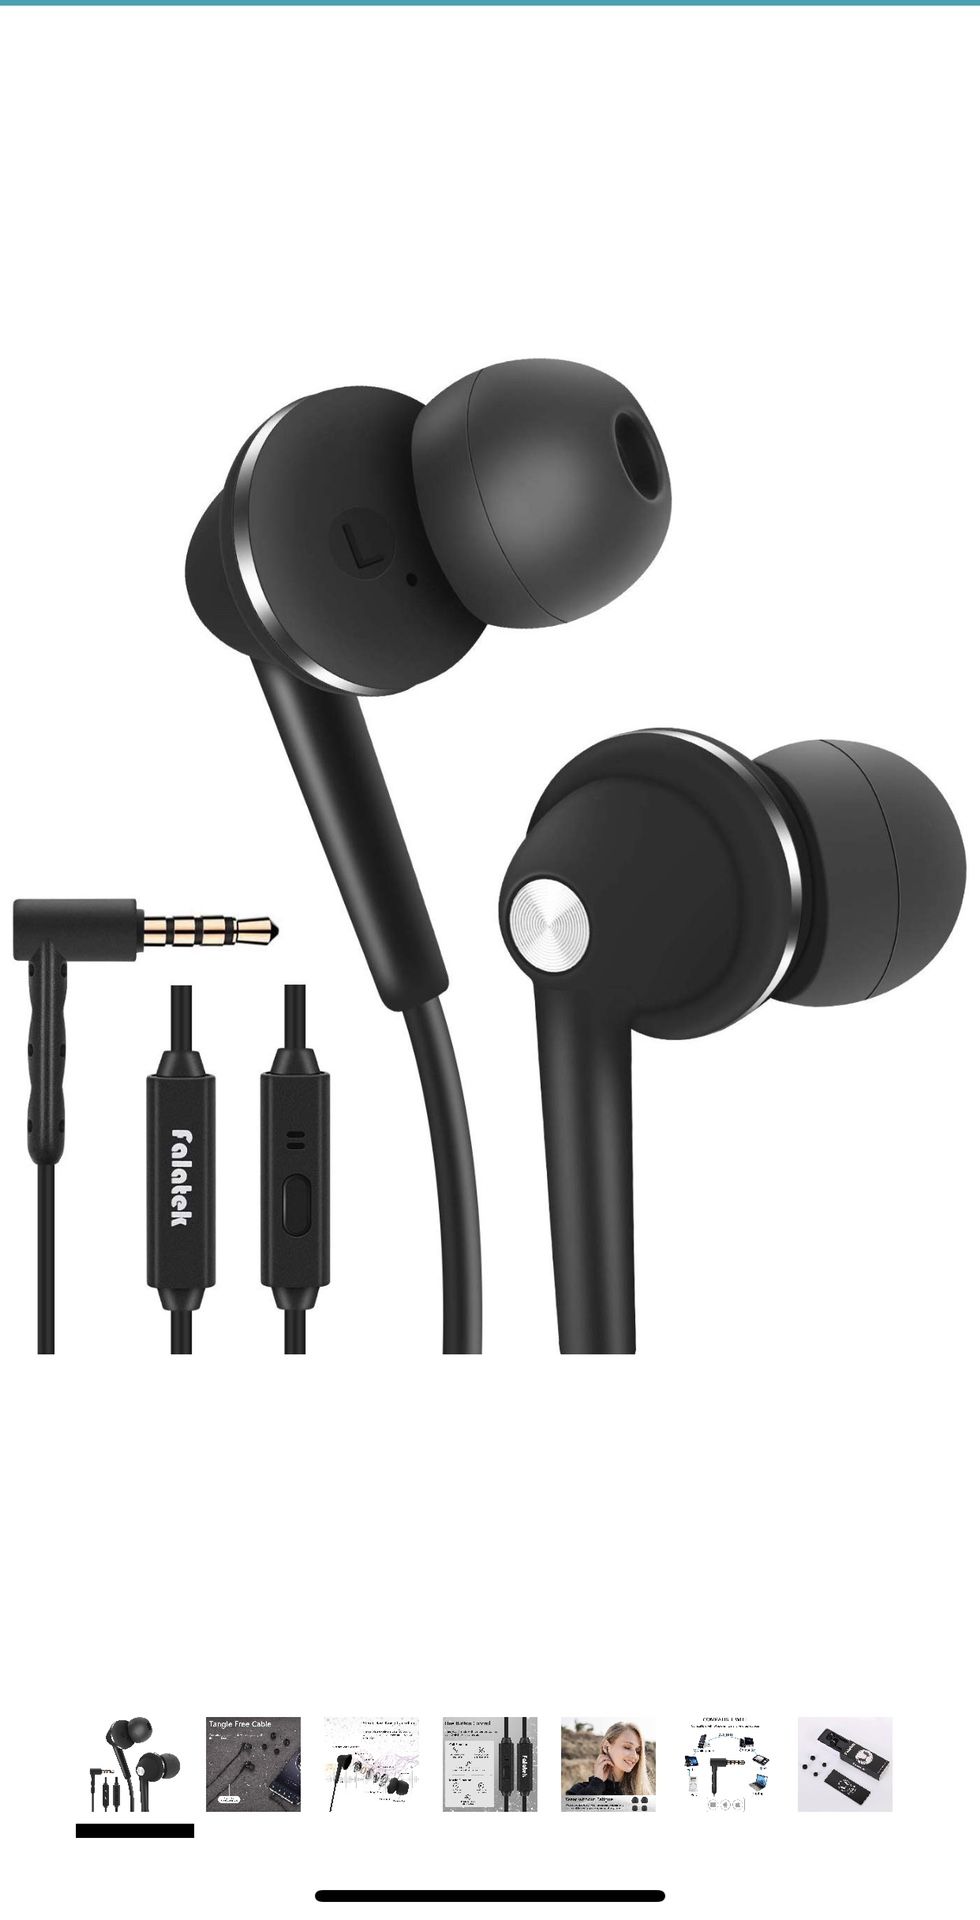 Brand new headphones earbuds with mic